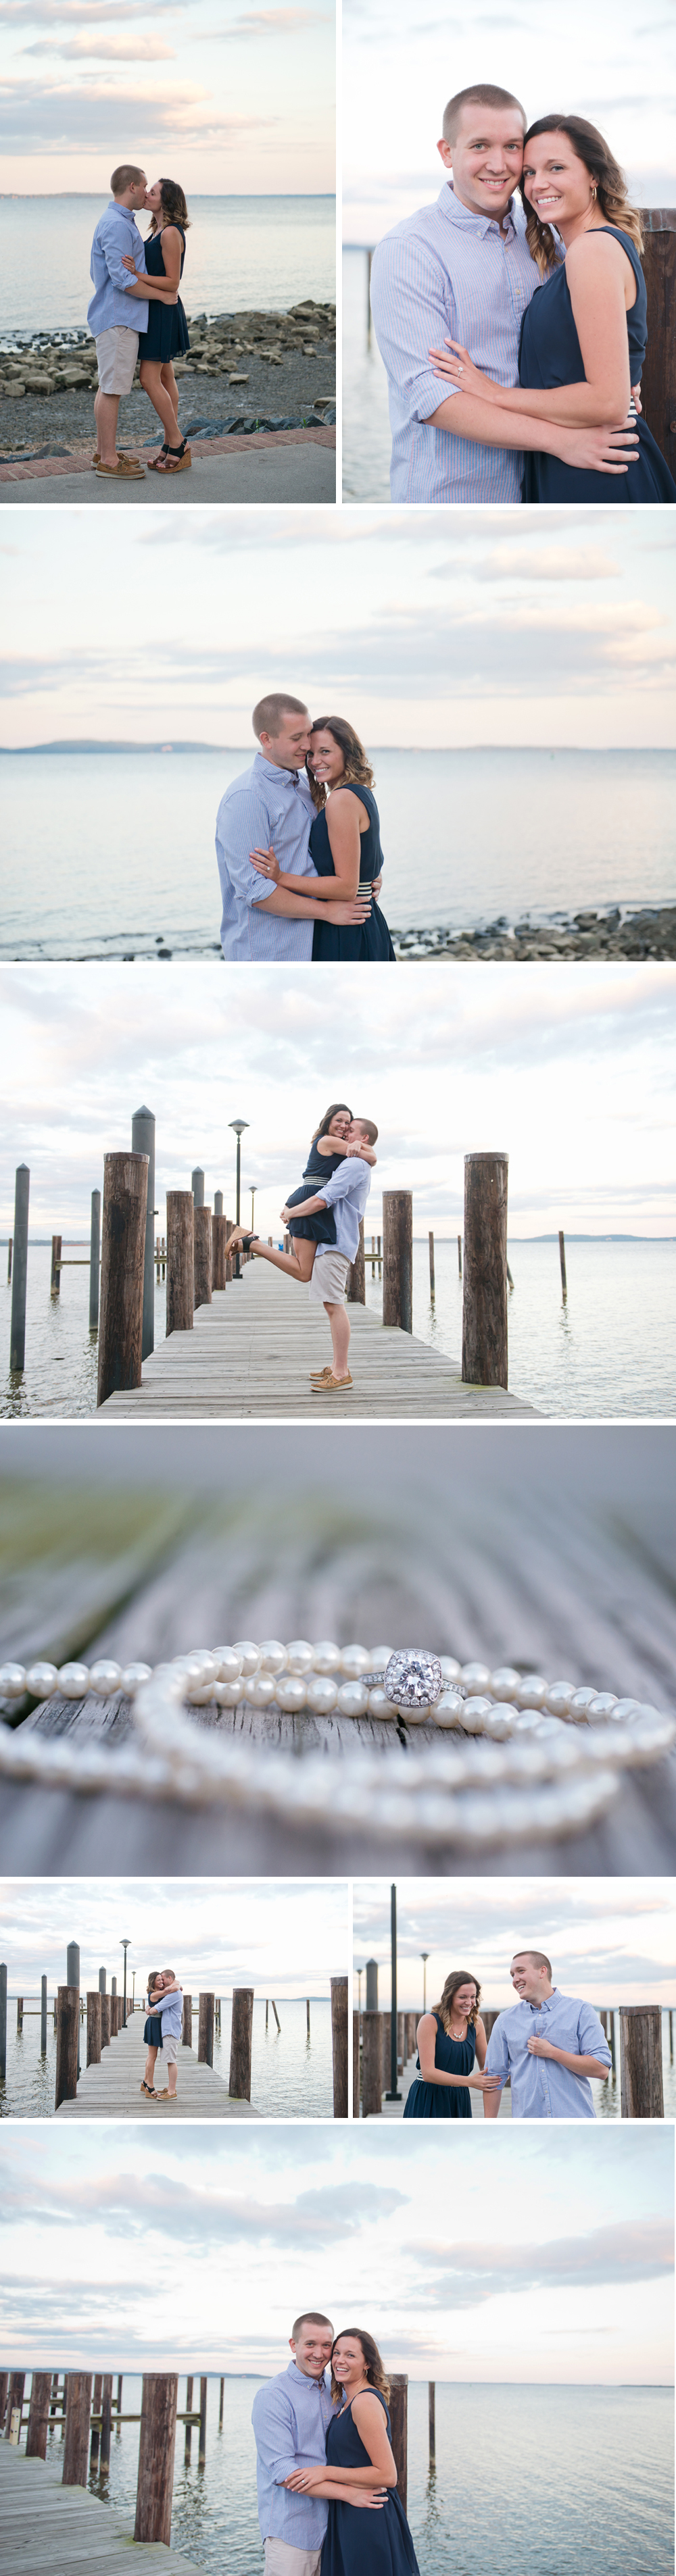 Harford_County_Engagement-12